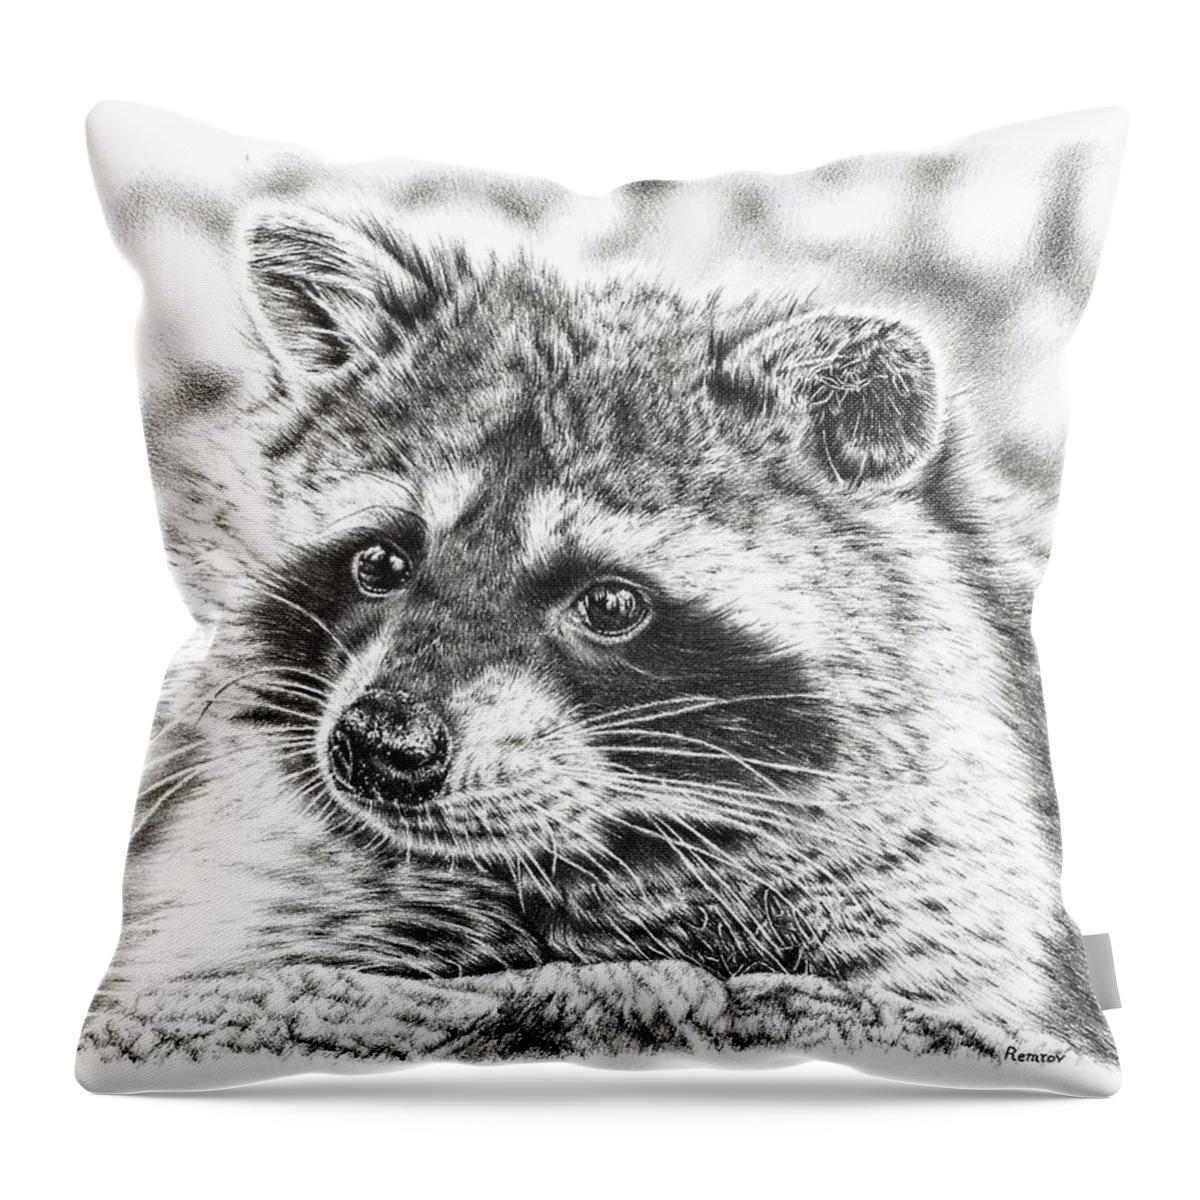 Raccoon Throw Pillow featuring the drawing Raccoon by Casey 'Remrov' Vormer